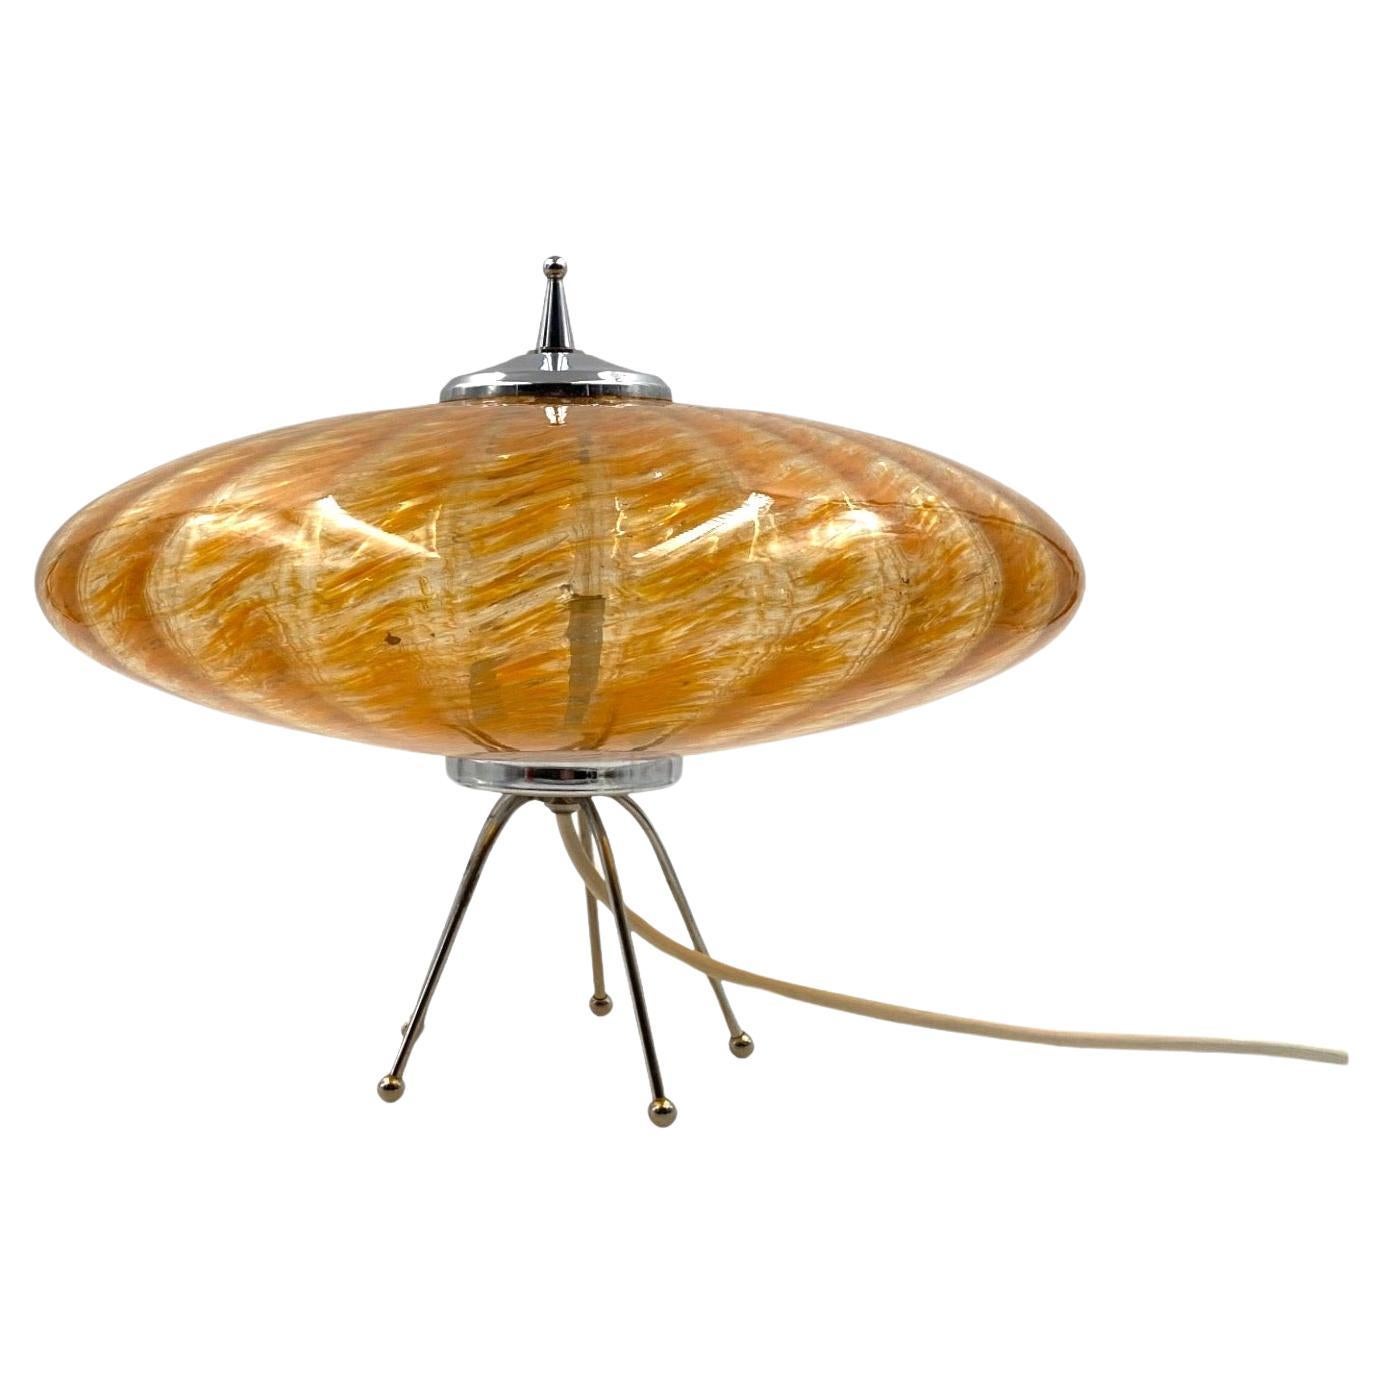 Murano orange glass flying saucer Ufo table lamp, Murano Italy 1970s For Sale